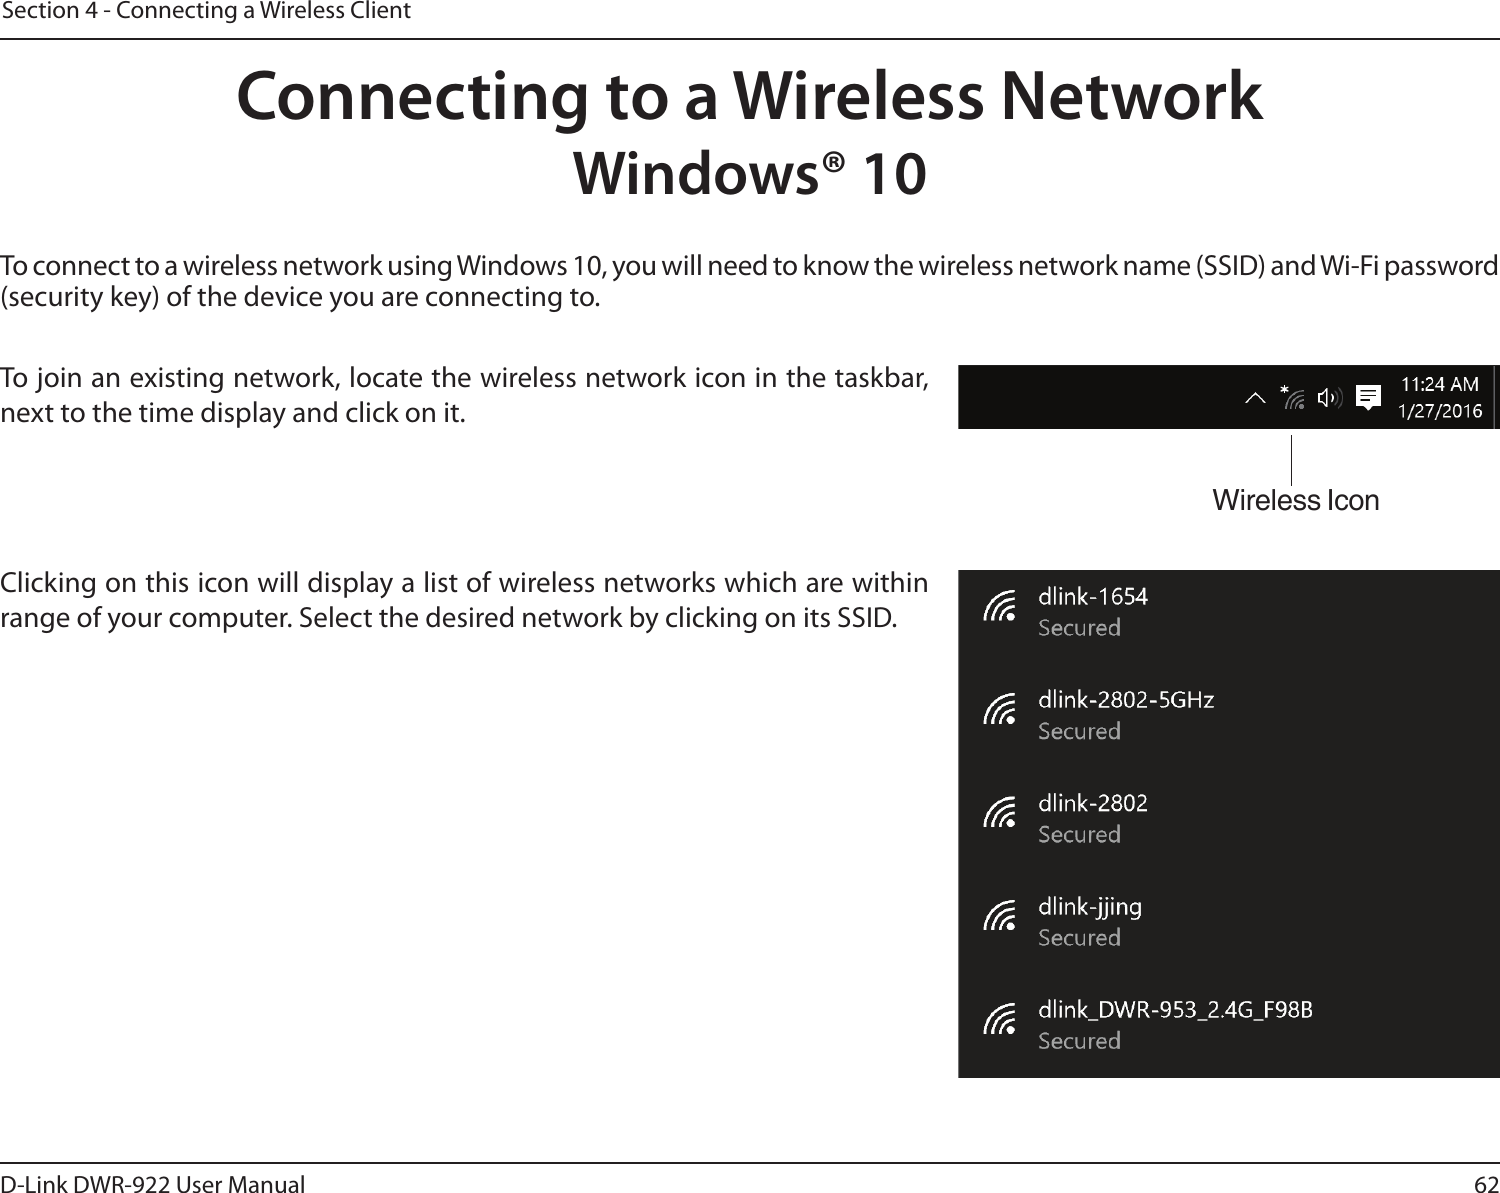 62D-Link DWR-922 User ManualSection 4 - Connecting a Wireless ClientTo connect to a wireless network using Windows 10, you will need to know the wireless network name (SSID) and Wi-Fi password (security key) of the device you are connecting to. To join an existing network, locate the wireless network icon in the taskbar, next to the time display and click on it. Wireless IconClicking on this icon will display a list of wireless networks which are within range of your computer. Select the desired network by clicking on its SSID.Connecting to a Wireless NetworkWindows® 10